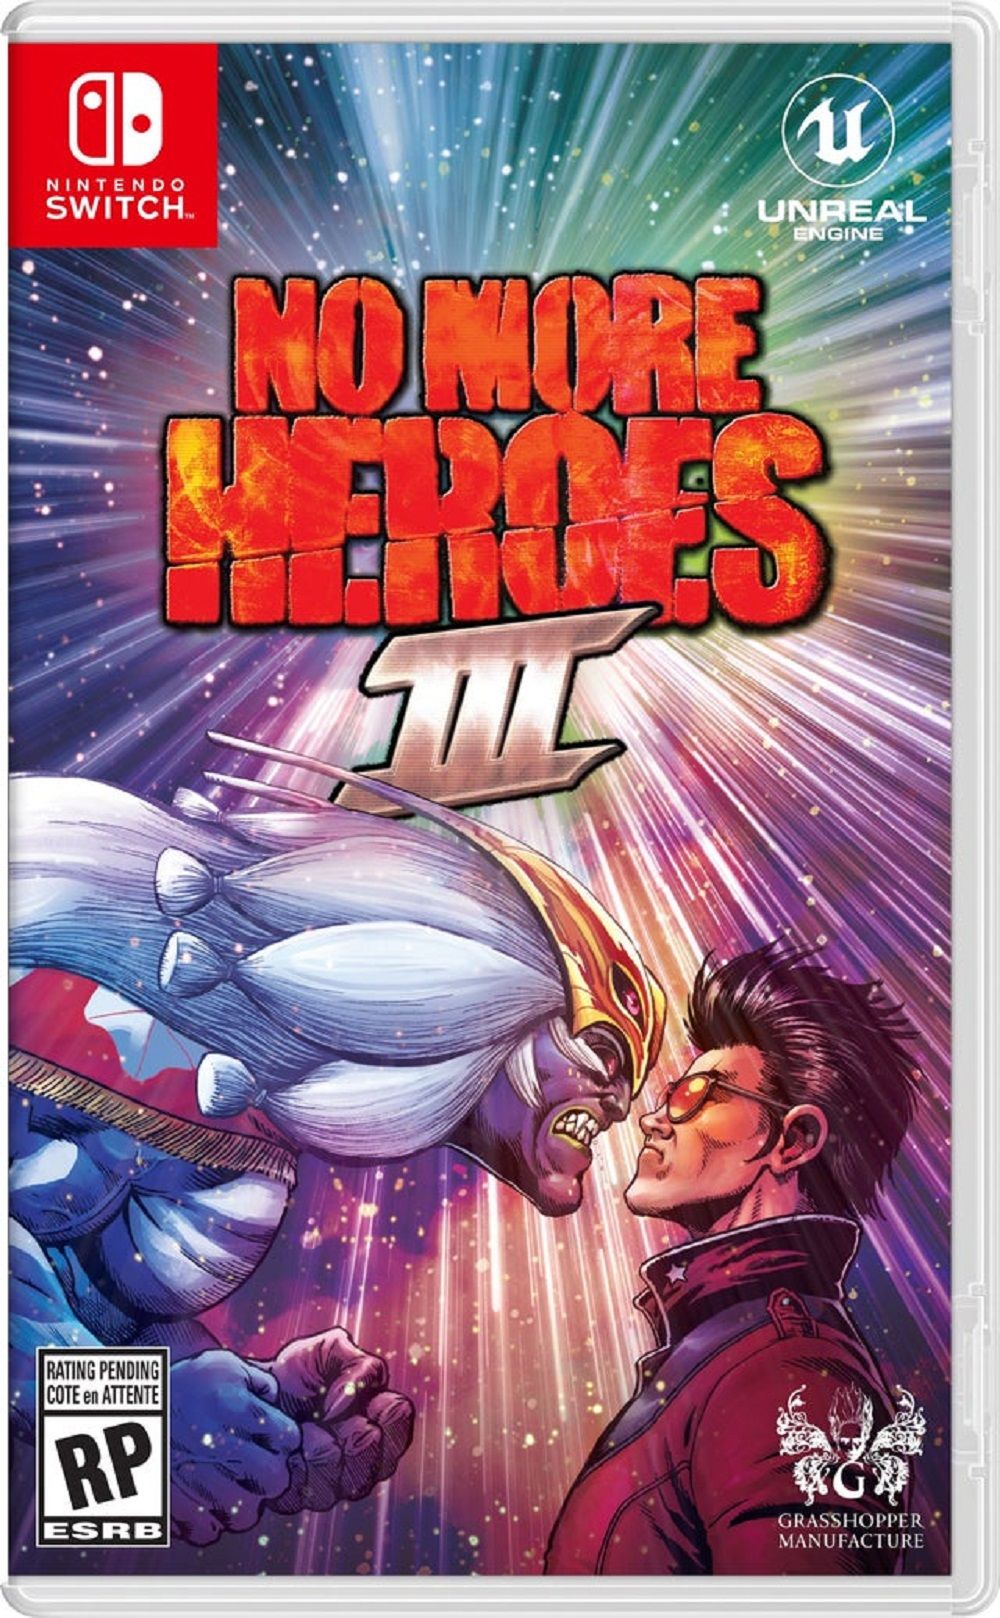 Box art for No More Heroes 3